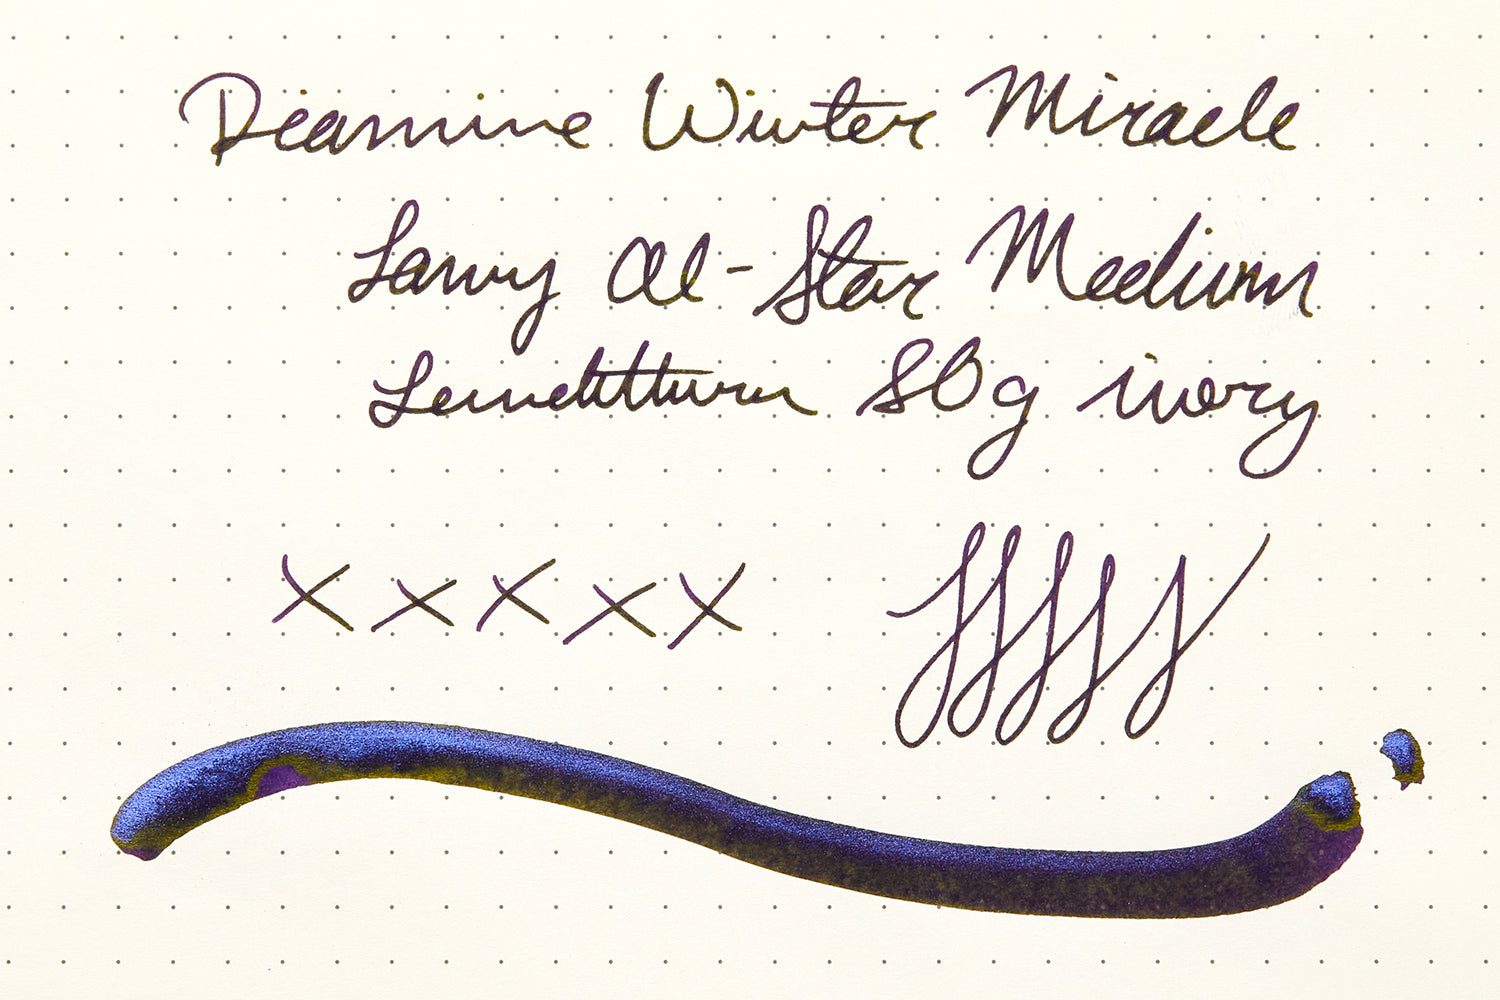 Diamine Winter Miracle ink review on Leuchtturm paper